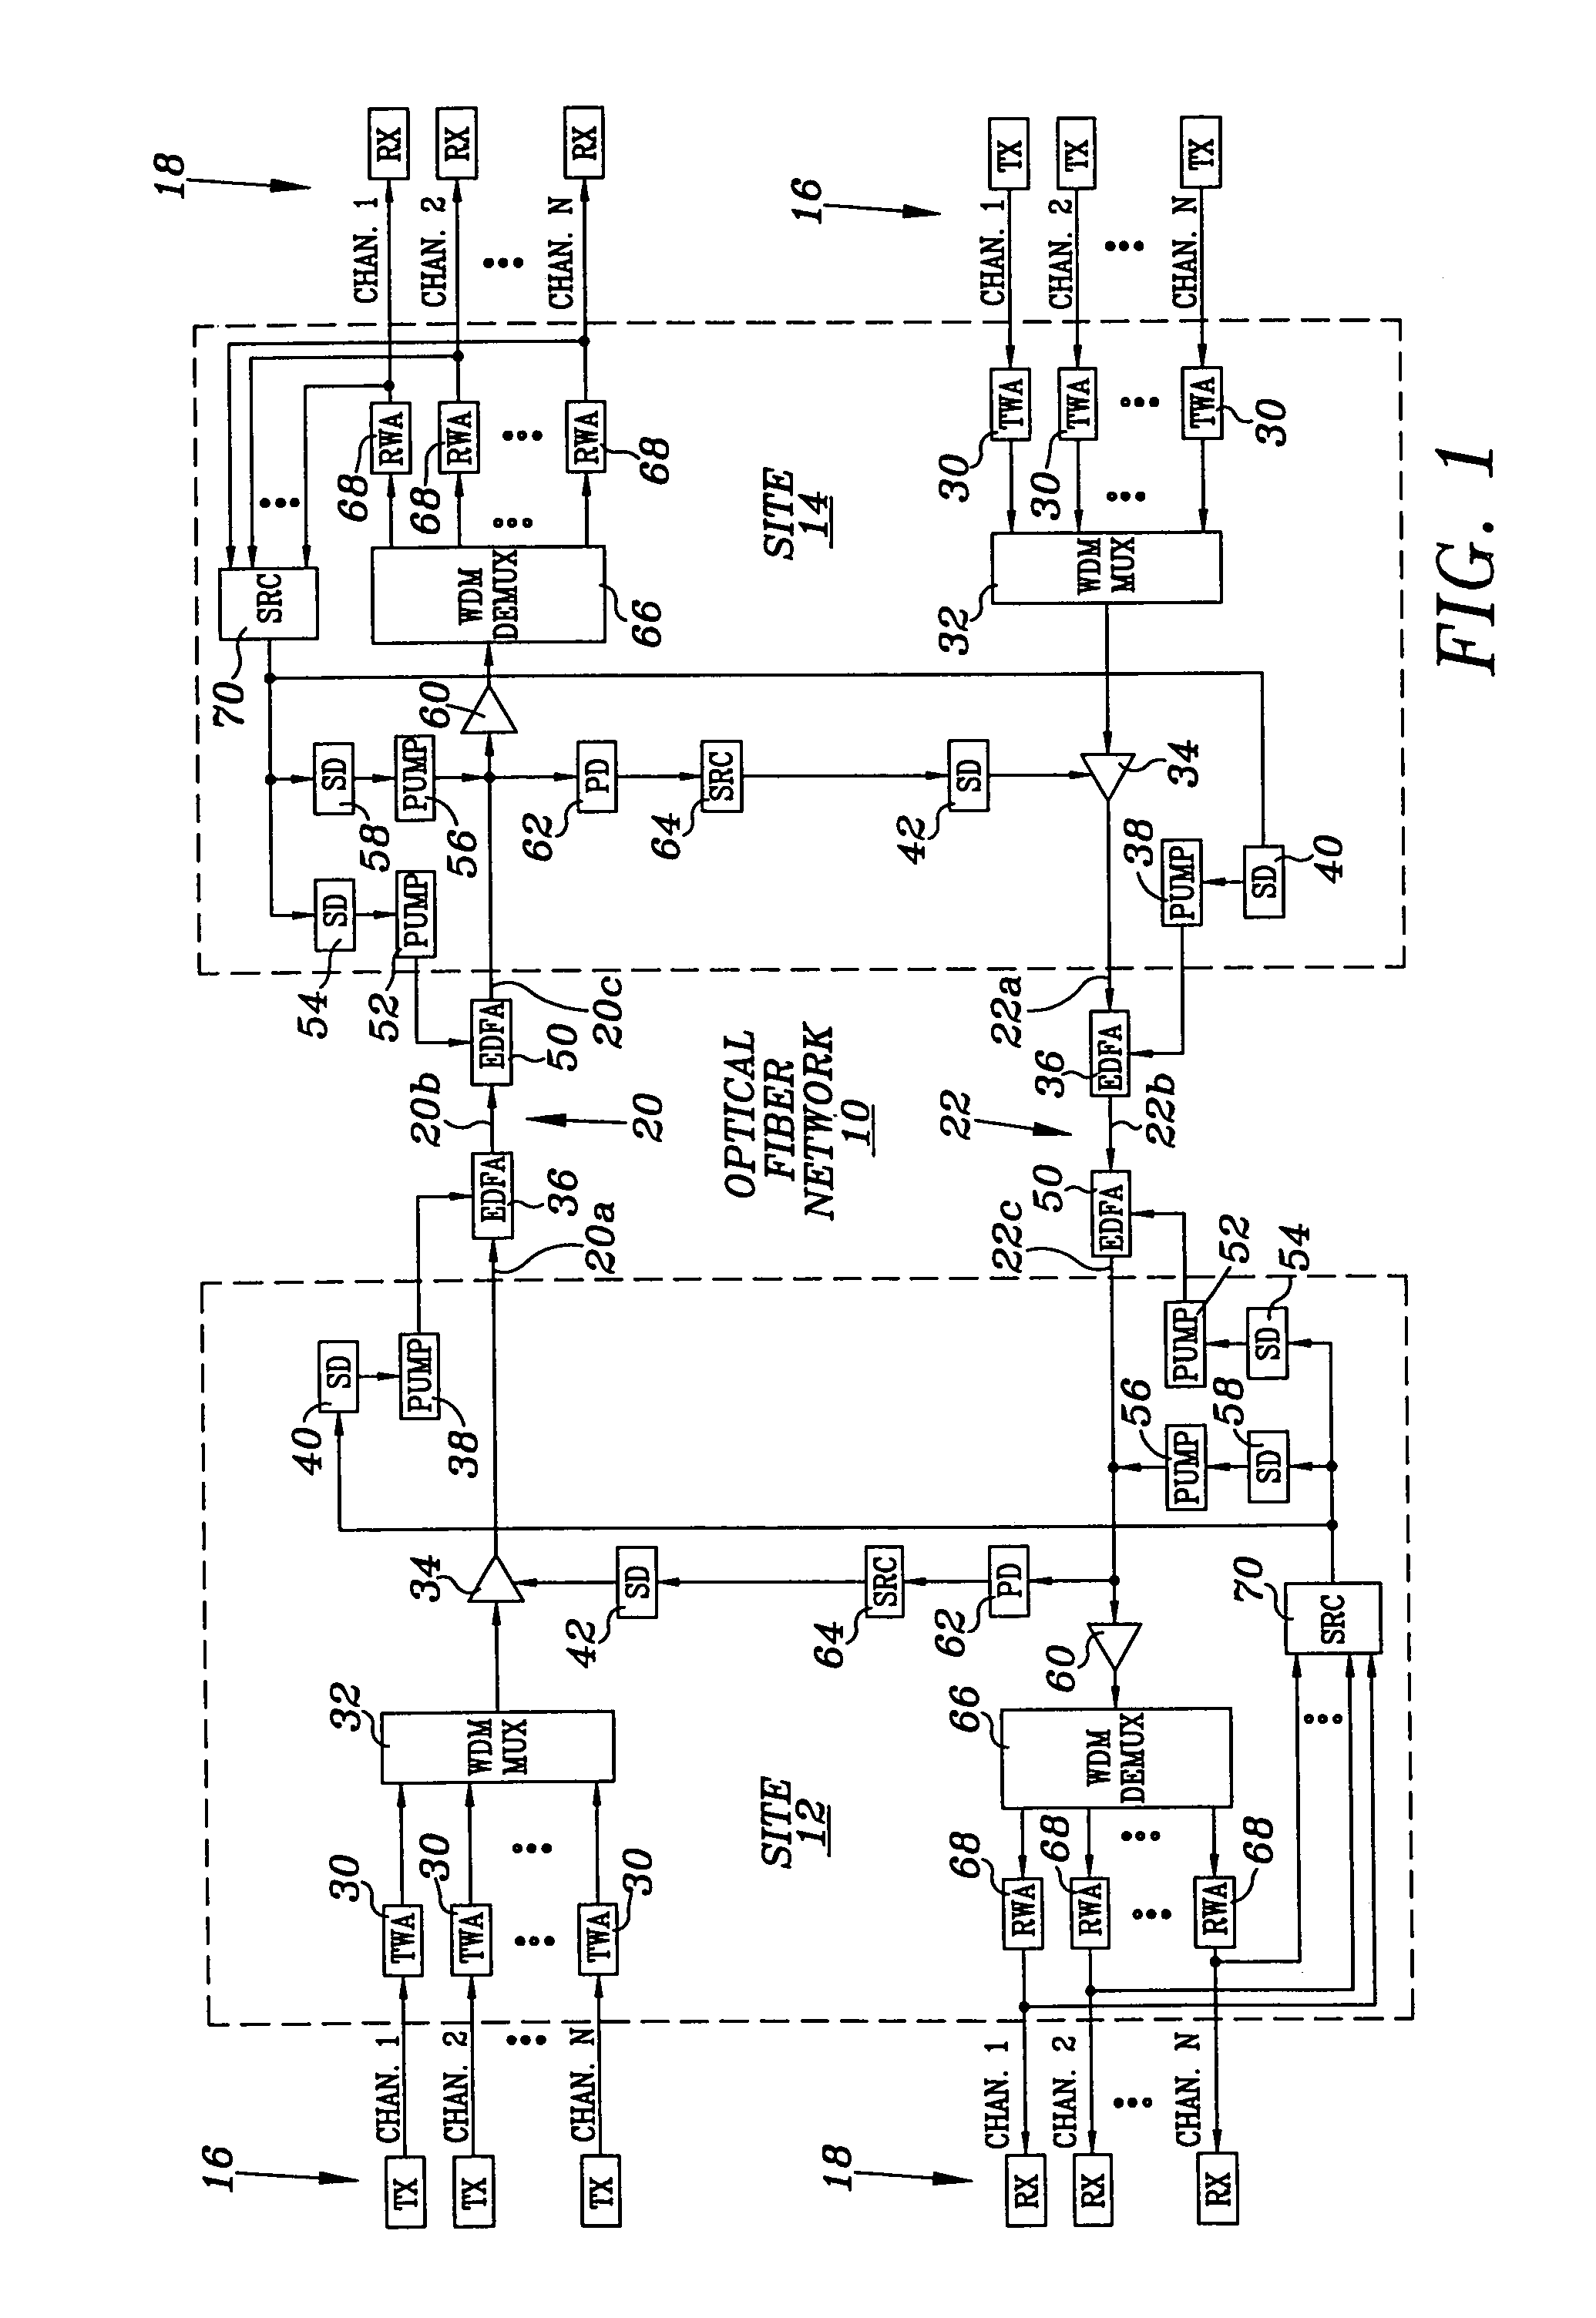 Safety shutdown system for a WDM fiber optic communications network